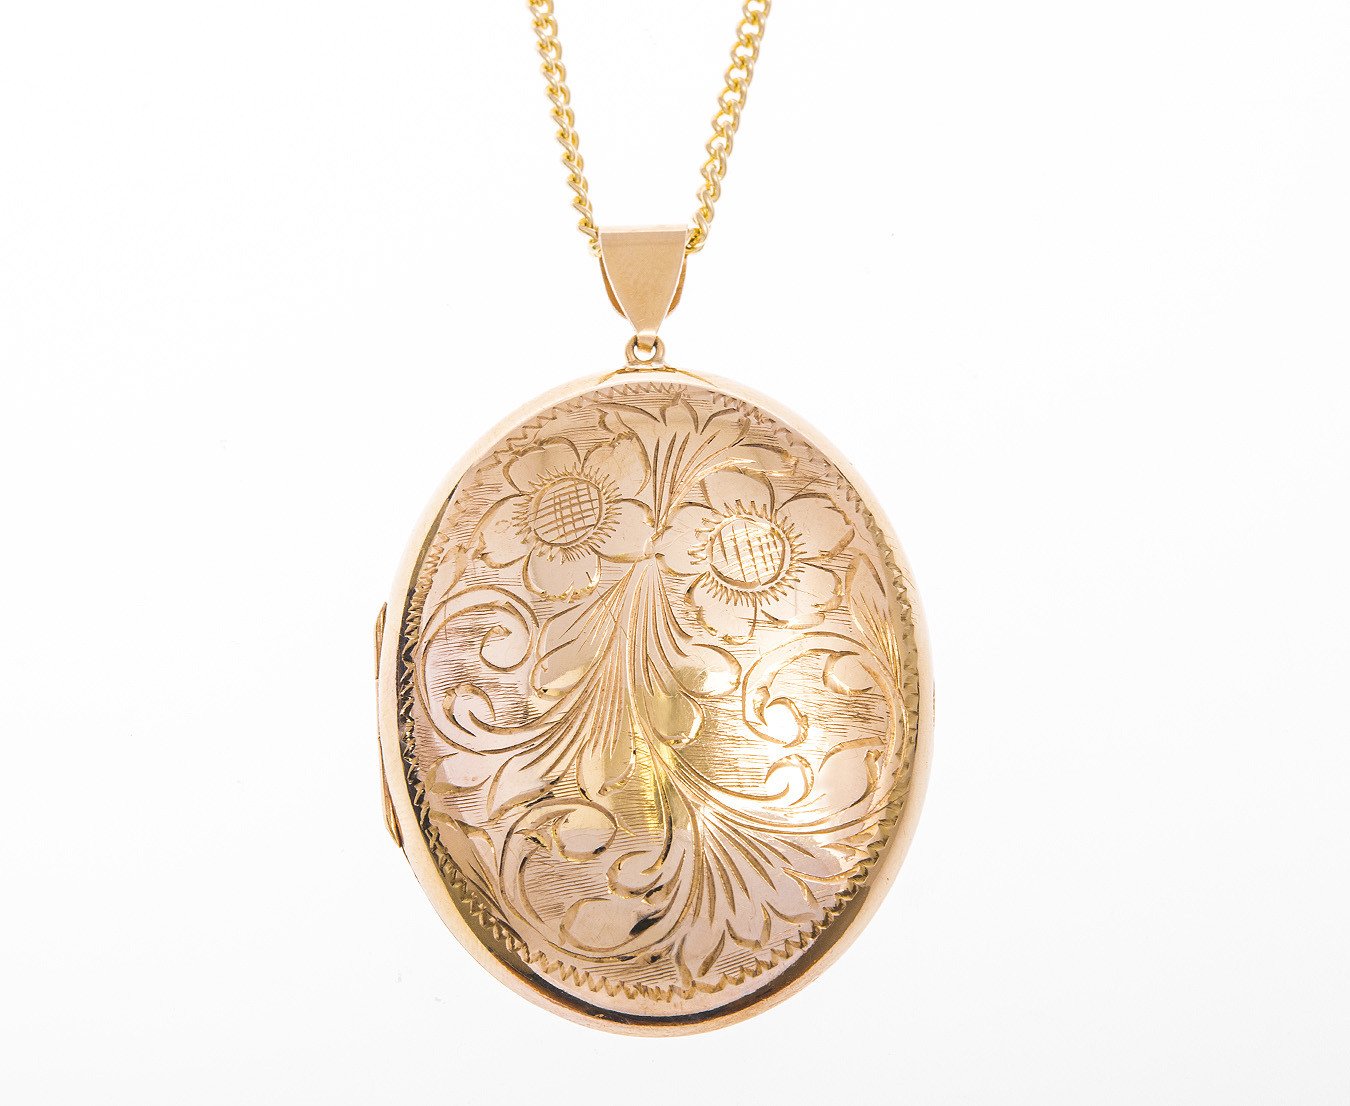 Vintage 9ct Gold Large Oval Locket | Buy Online | Free and Fast UK ...